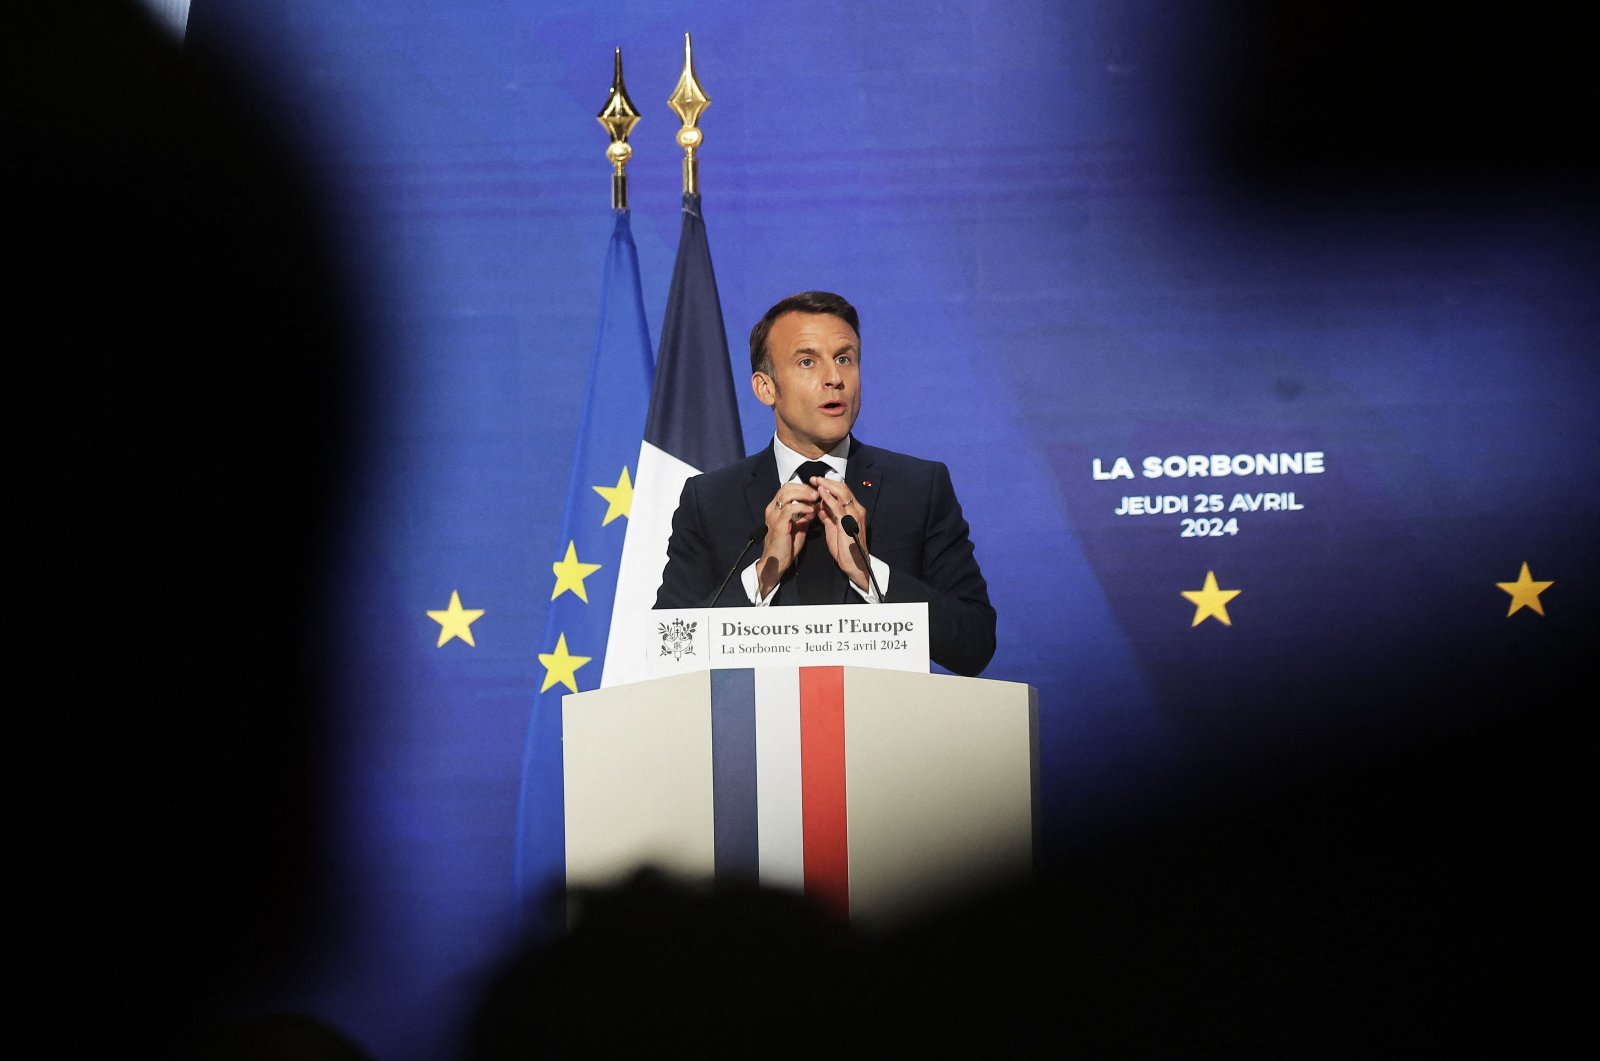 French President Emmanuel Macron delivers a speech on Europe in an amphitheater of the Sorbonne University in Paris, France, April 25, 2024. (AFP Photo)